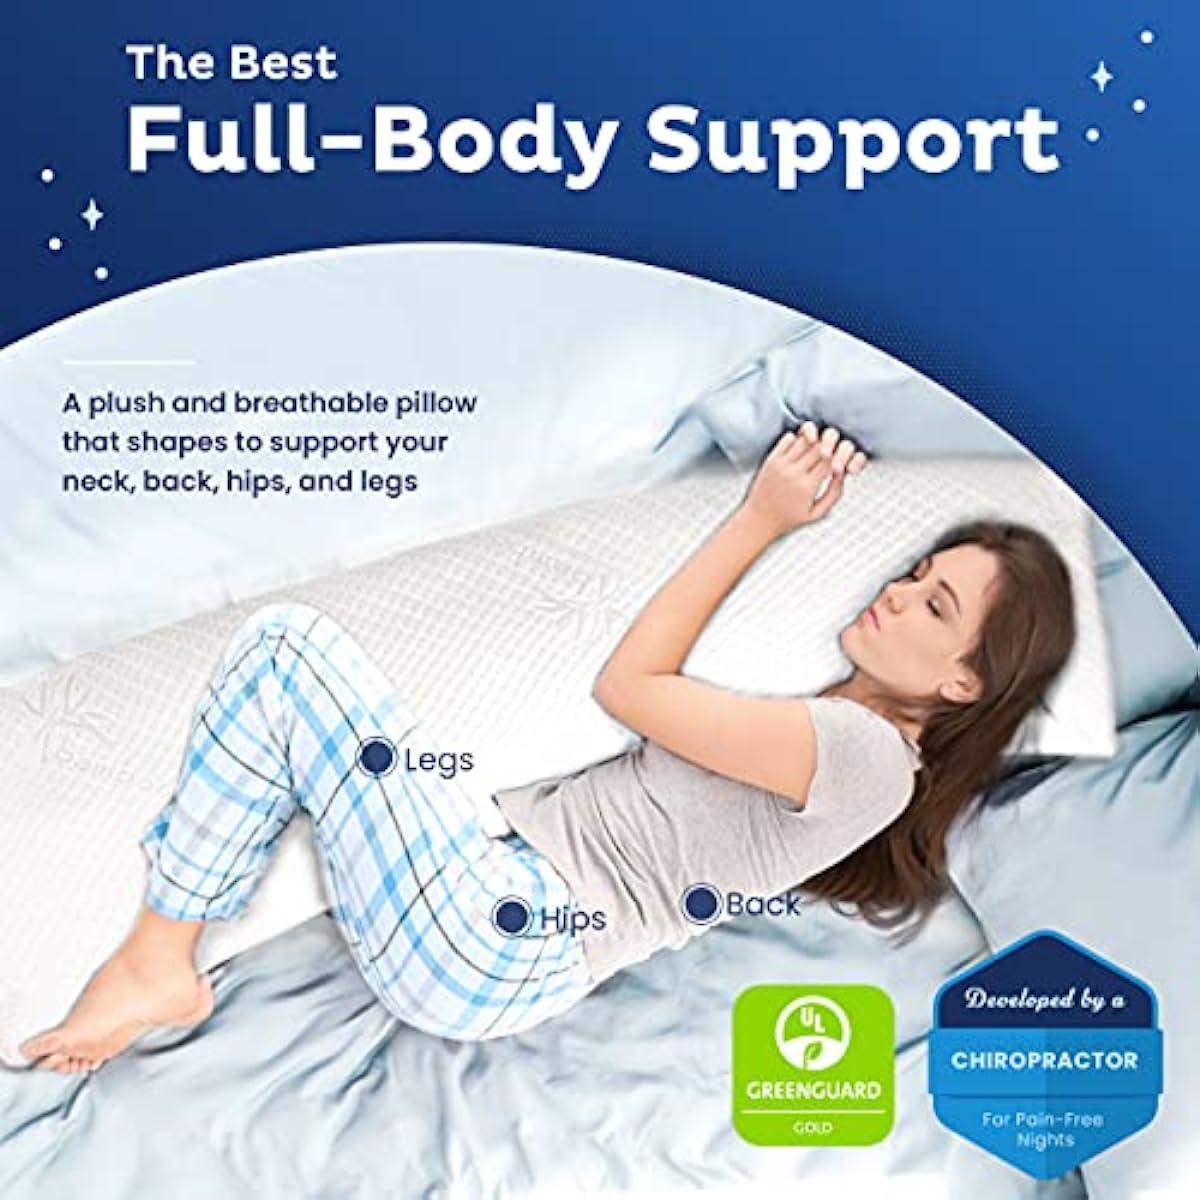 Snuggle-Pedic Full Body Pillow for Adults - 20 x 54 Long Pillow w/ Shredded Memory Foam & Kool-Flow Pillow Cover, Oeko-TEX / CertiPUR-US Certified - College Dorm Room Essentials for Girls and Guys